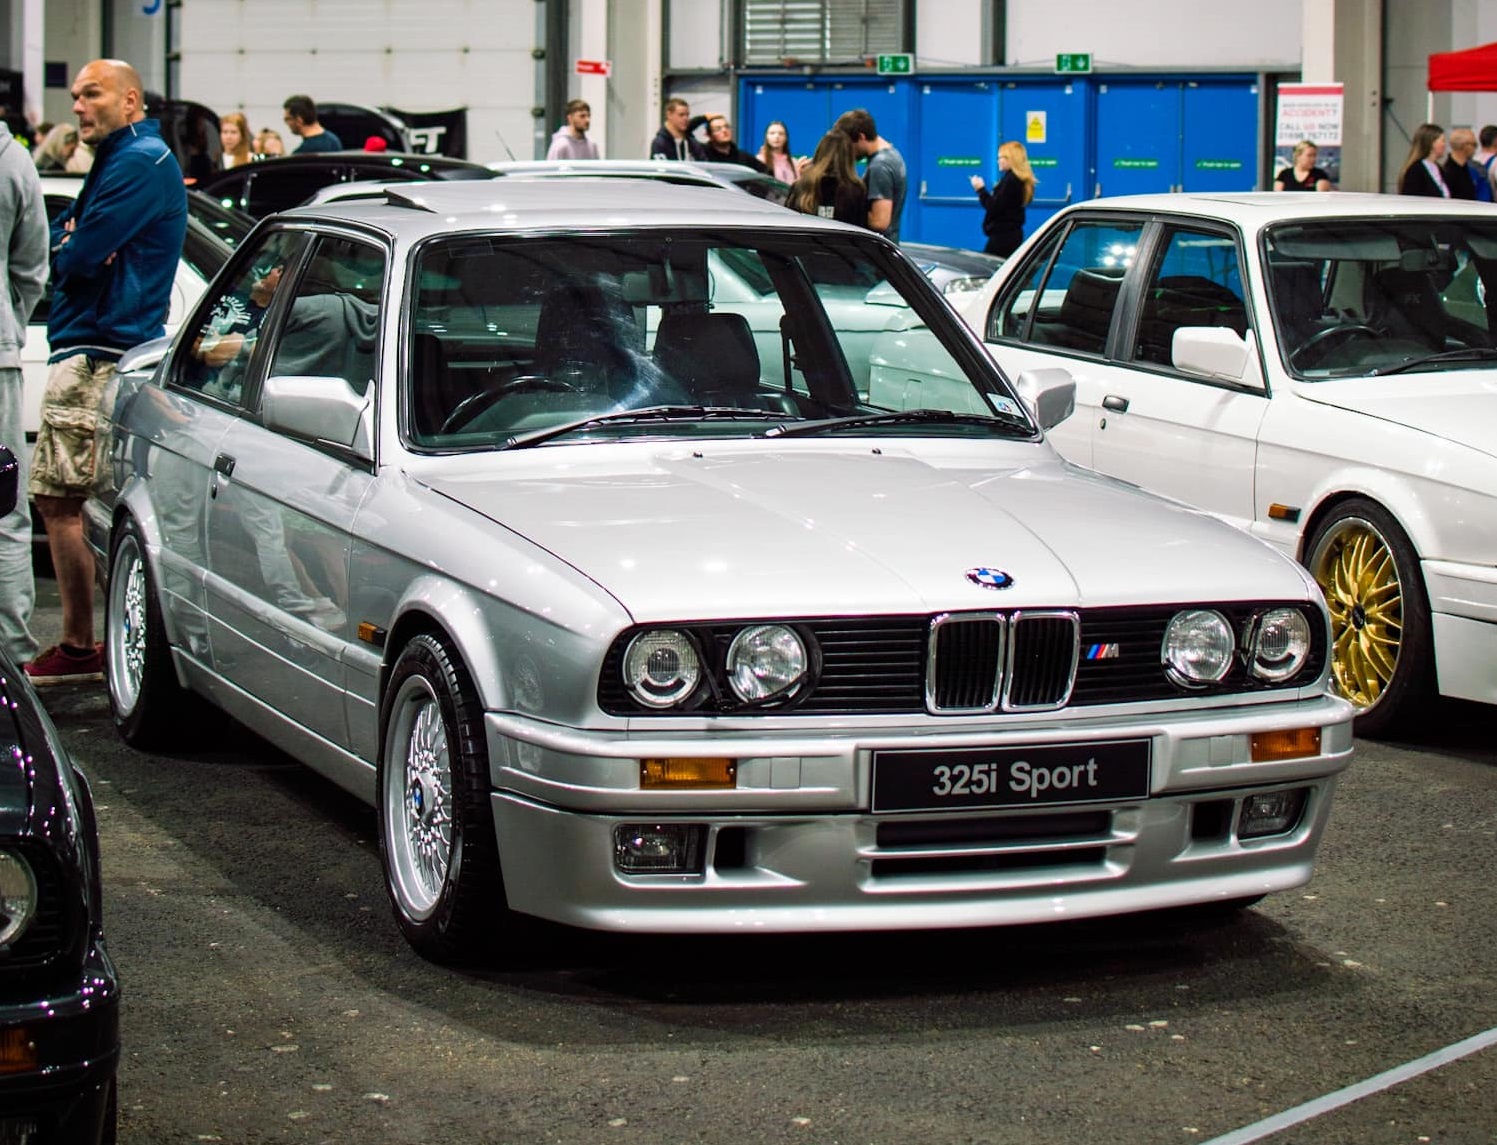 BMw Show and shine 2nd place